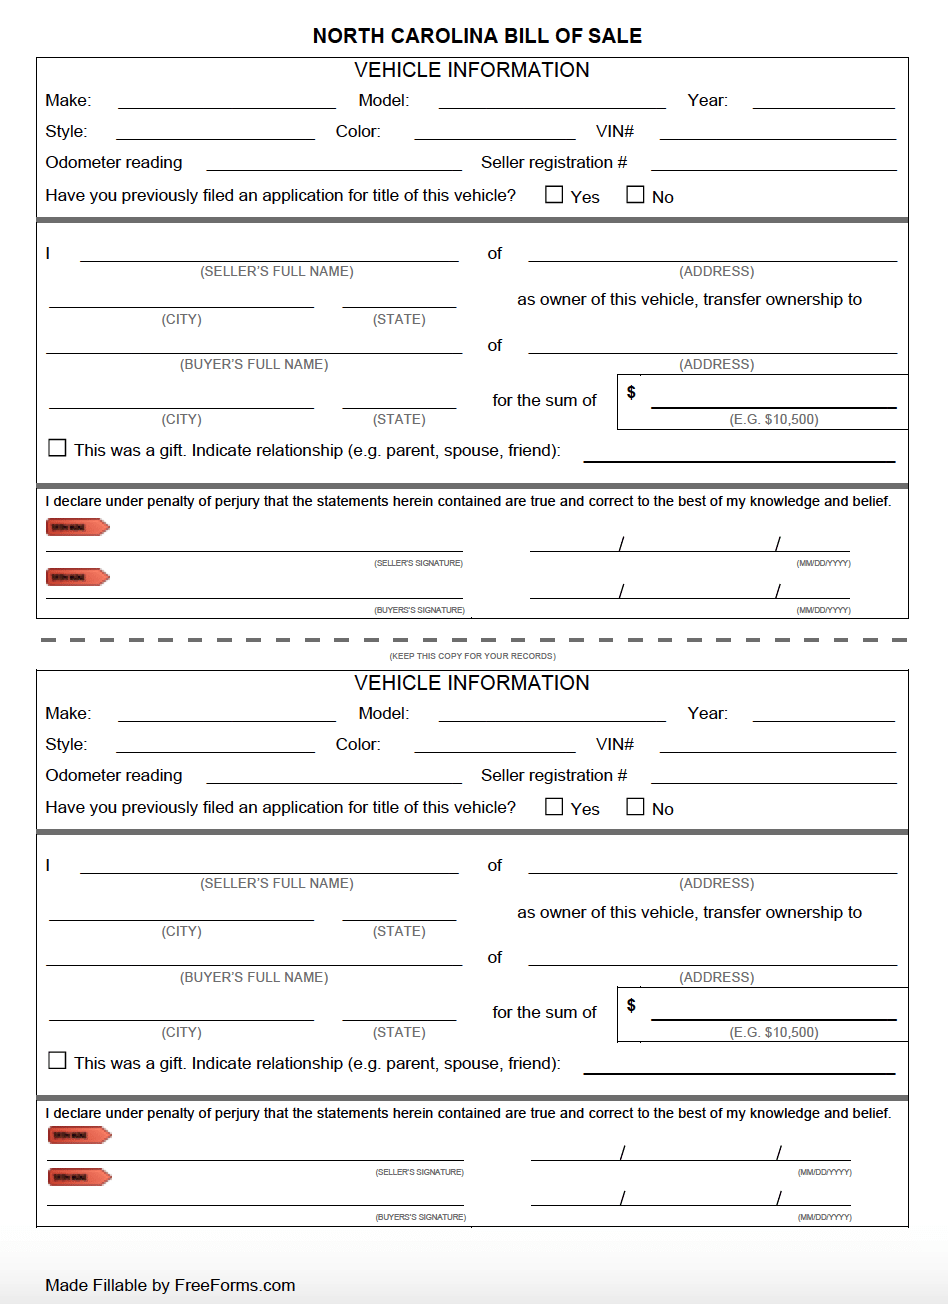 Bill Of Sale Form from freeforms.com